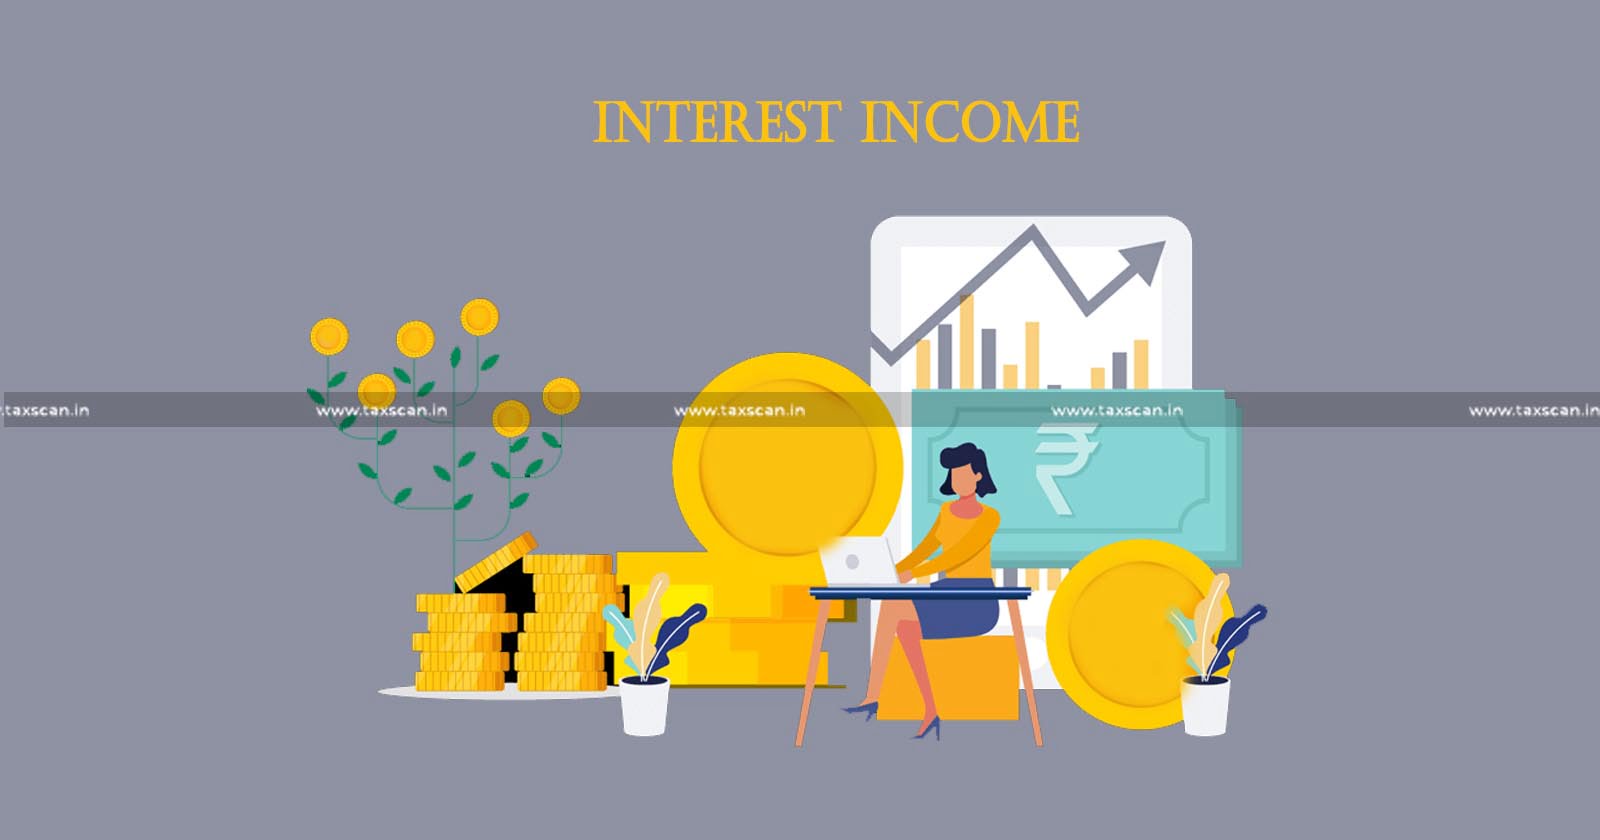 Interest- income- scheduled bank- deduction- ITAT-income tax-taxscan